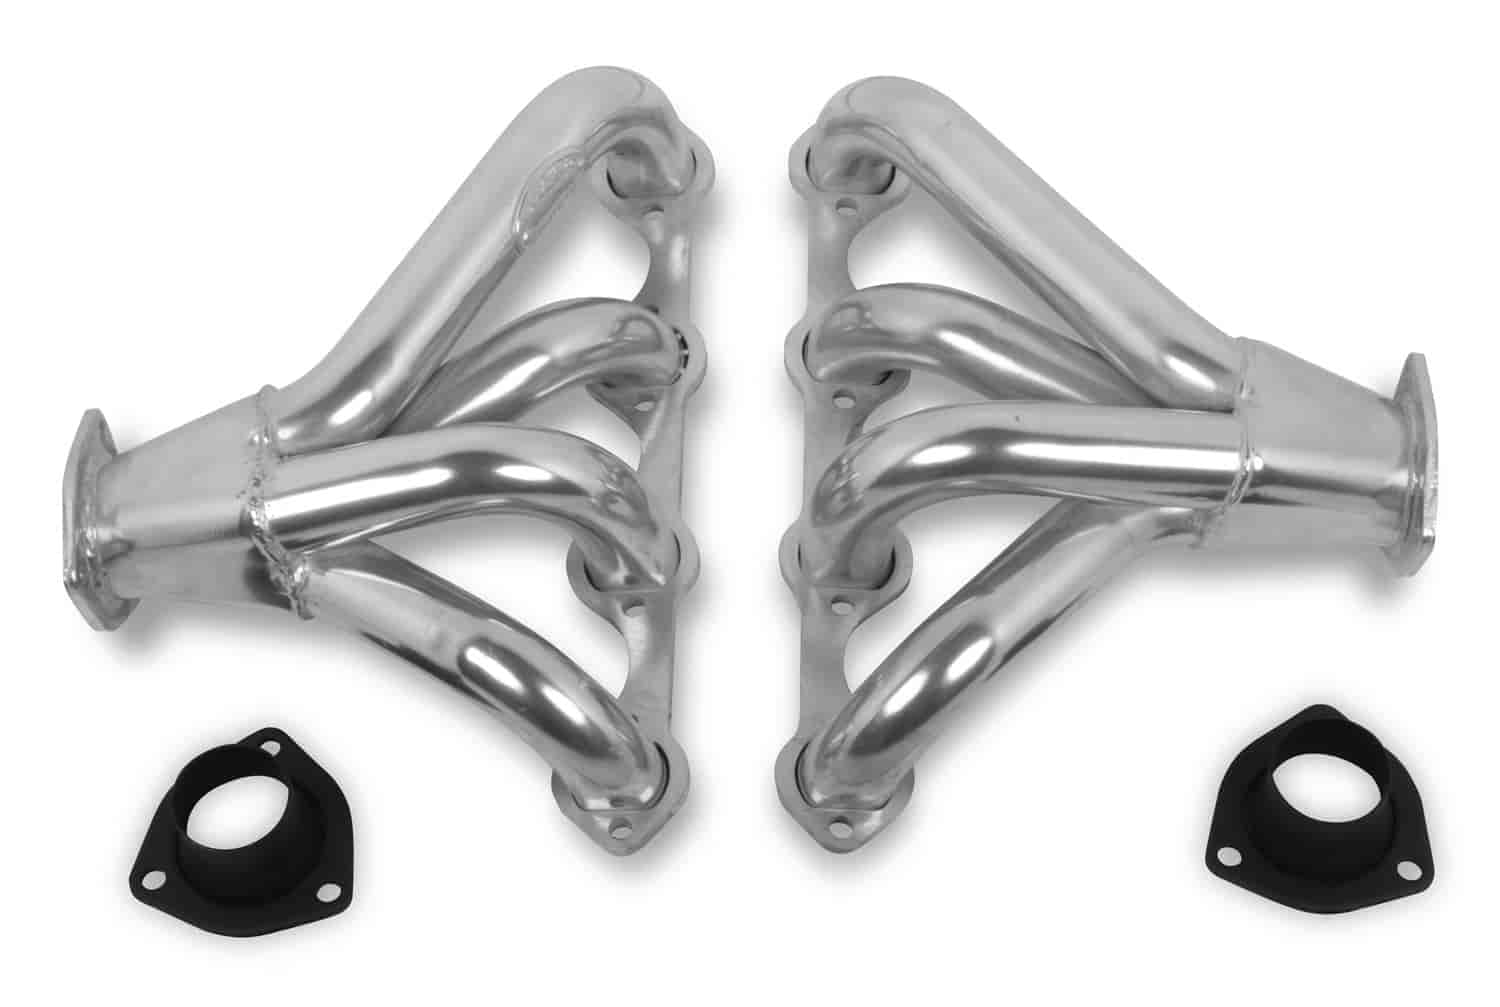 *USED - Super Competition Block Hugger Headers 255-302W Ford Small Block V8